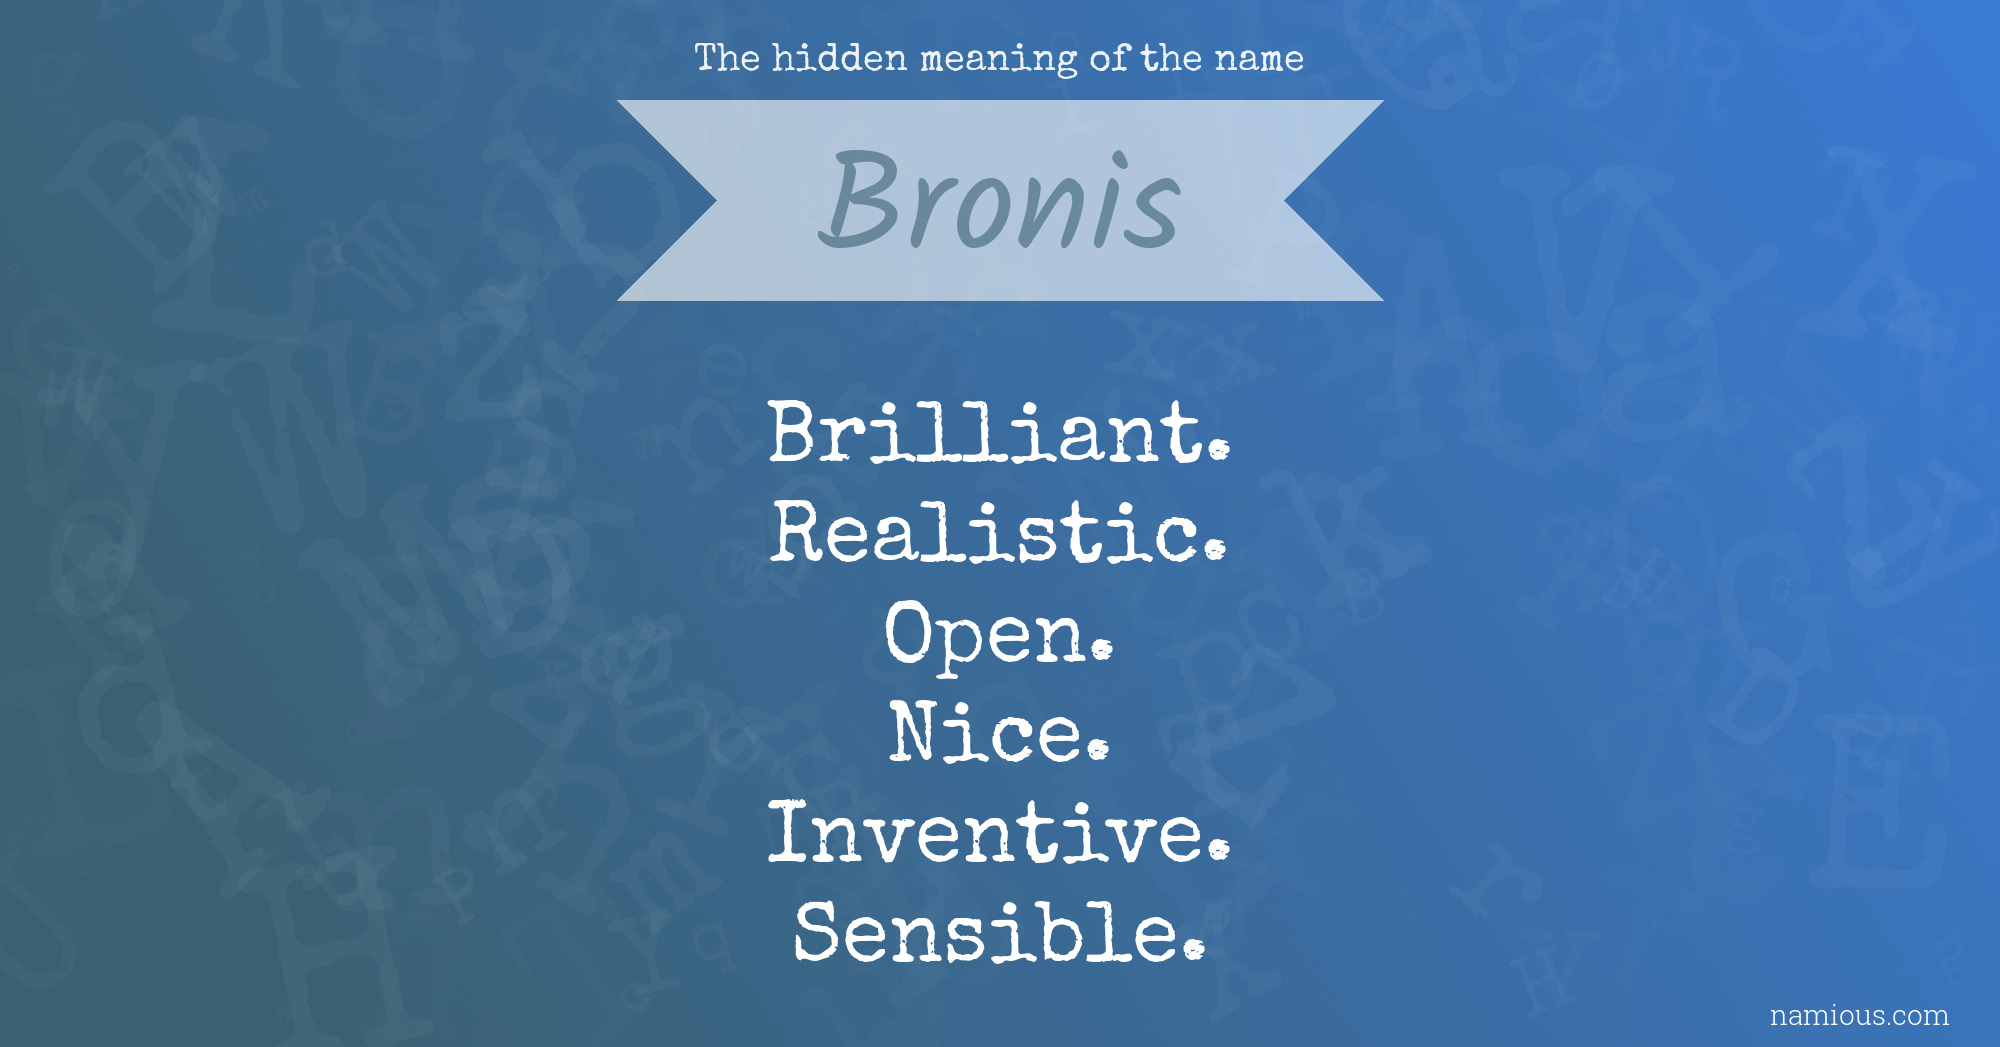 The hidden meaning of the name Bronis